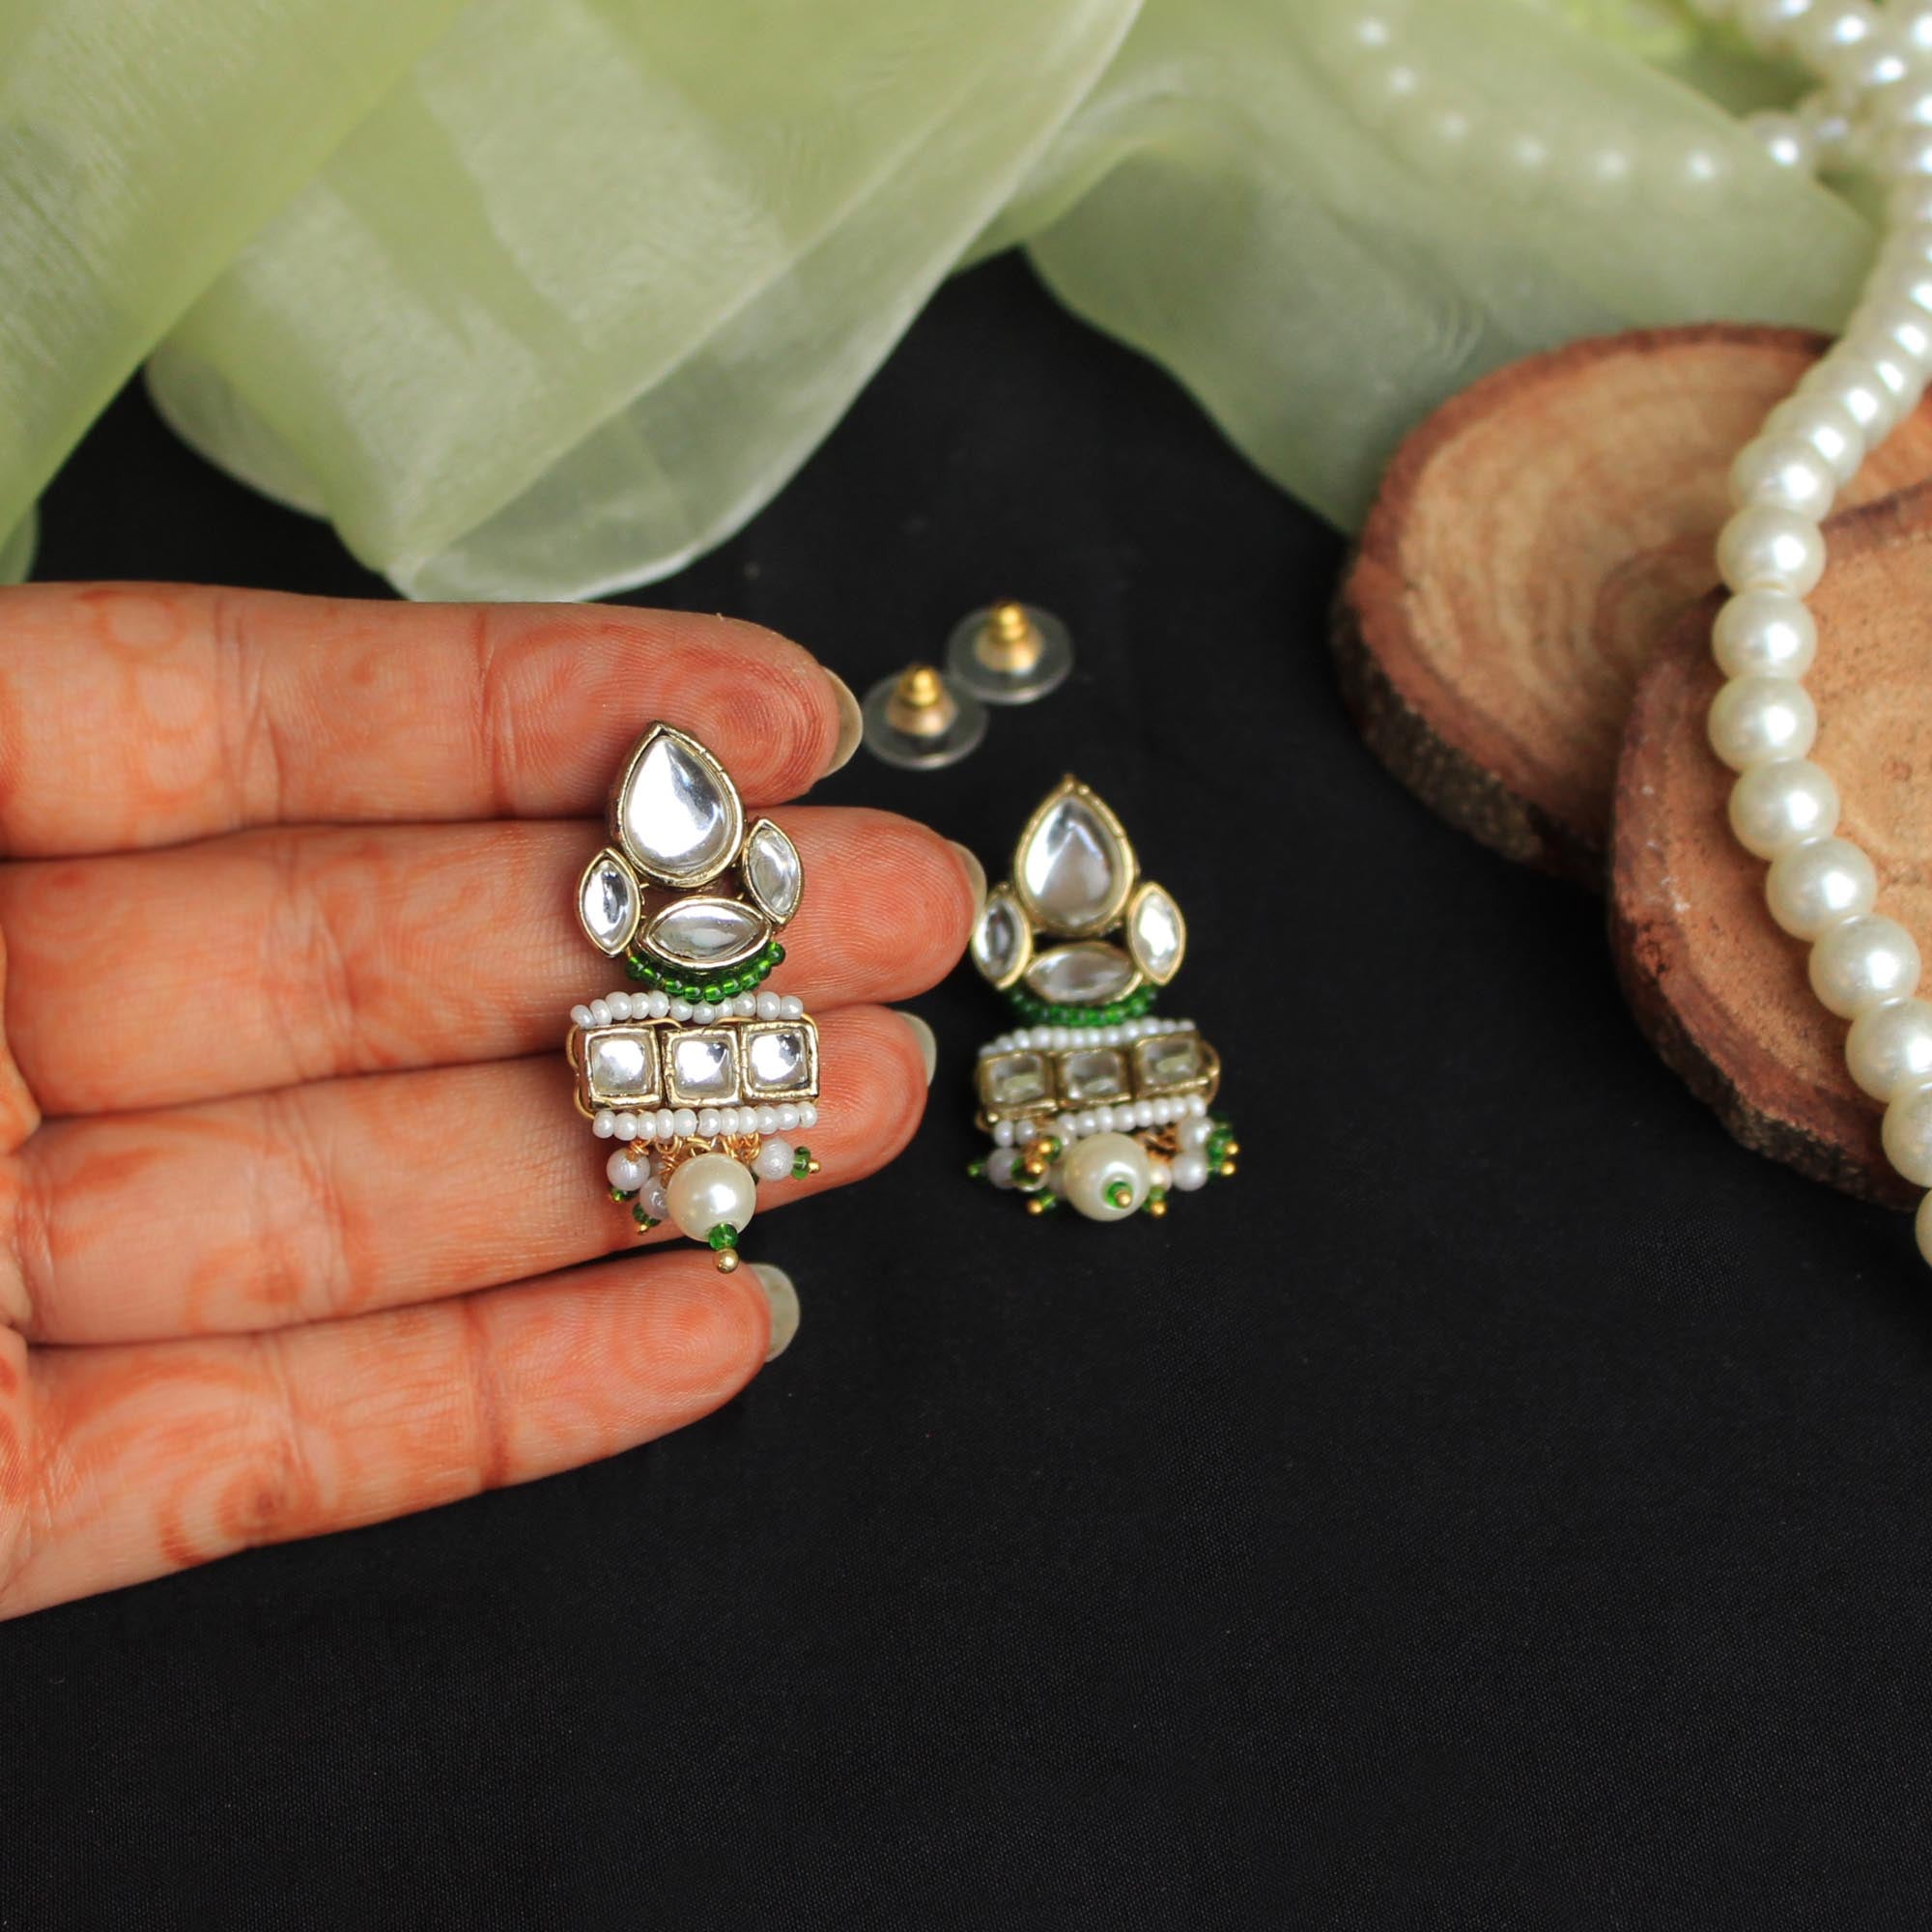 Beabhika Handmade Green Artificial Jewelry Kundan Earrings Golden Earrings With Matching Ring Pearls Kundan Wedding Jewelry Trendy Earrings Daily Wear Party Wear Traditional Ethnic Dress Jewelry Earrings Bridal Jewelry Set Online Cash On Delivery Value Saver Combo Jewelry Set Cheap Price